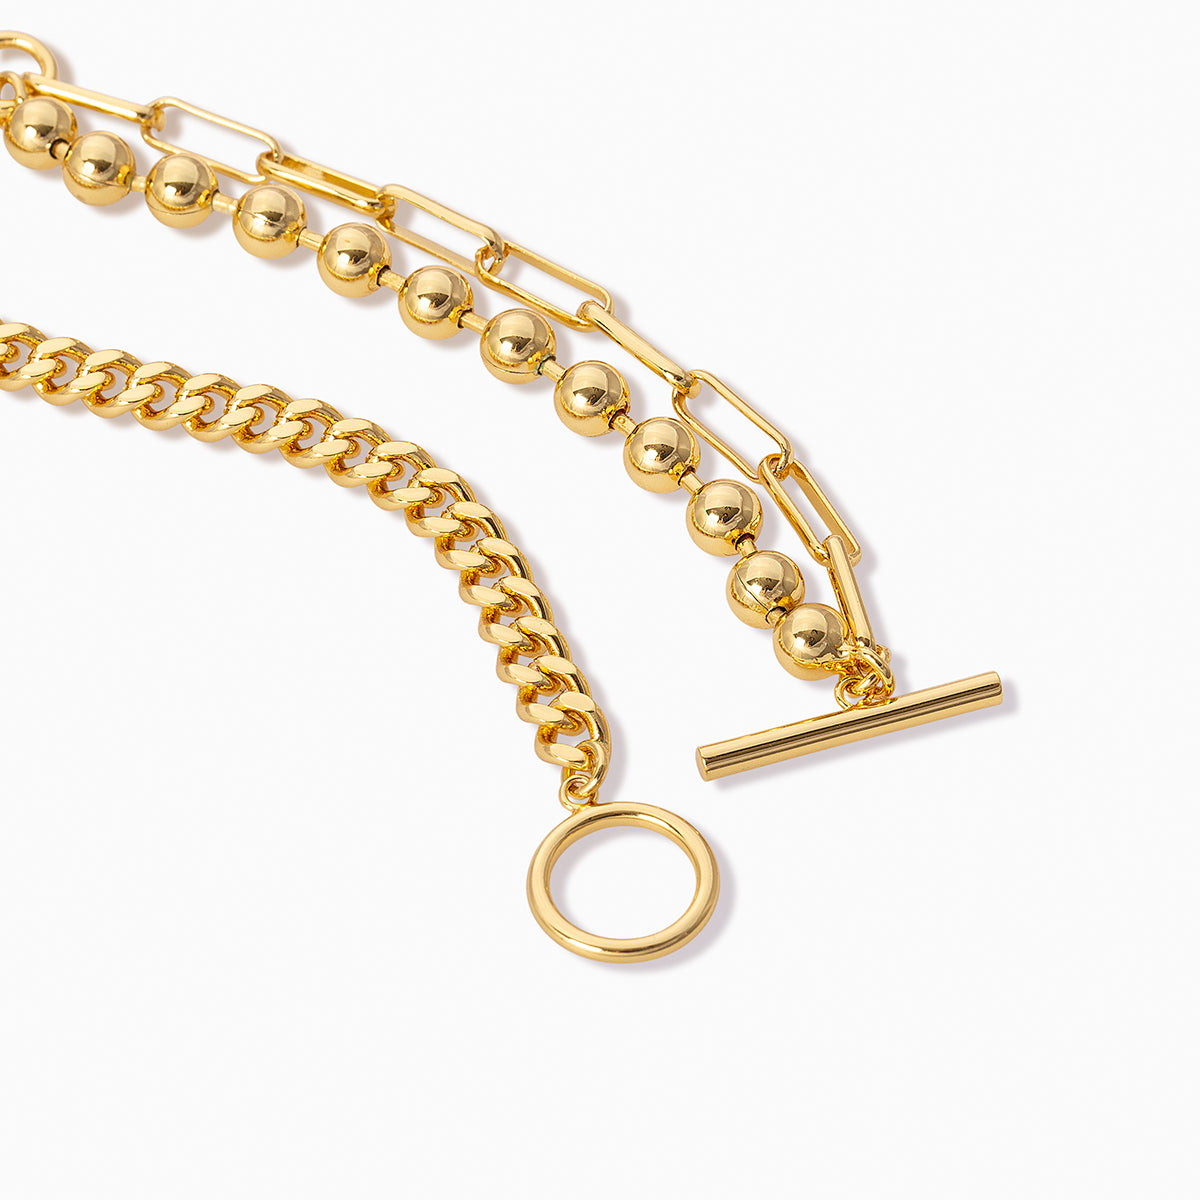 Three's a Party Chain Bracelet | Gold | Product Detail Image | Uncommon James